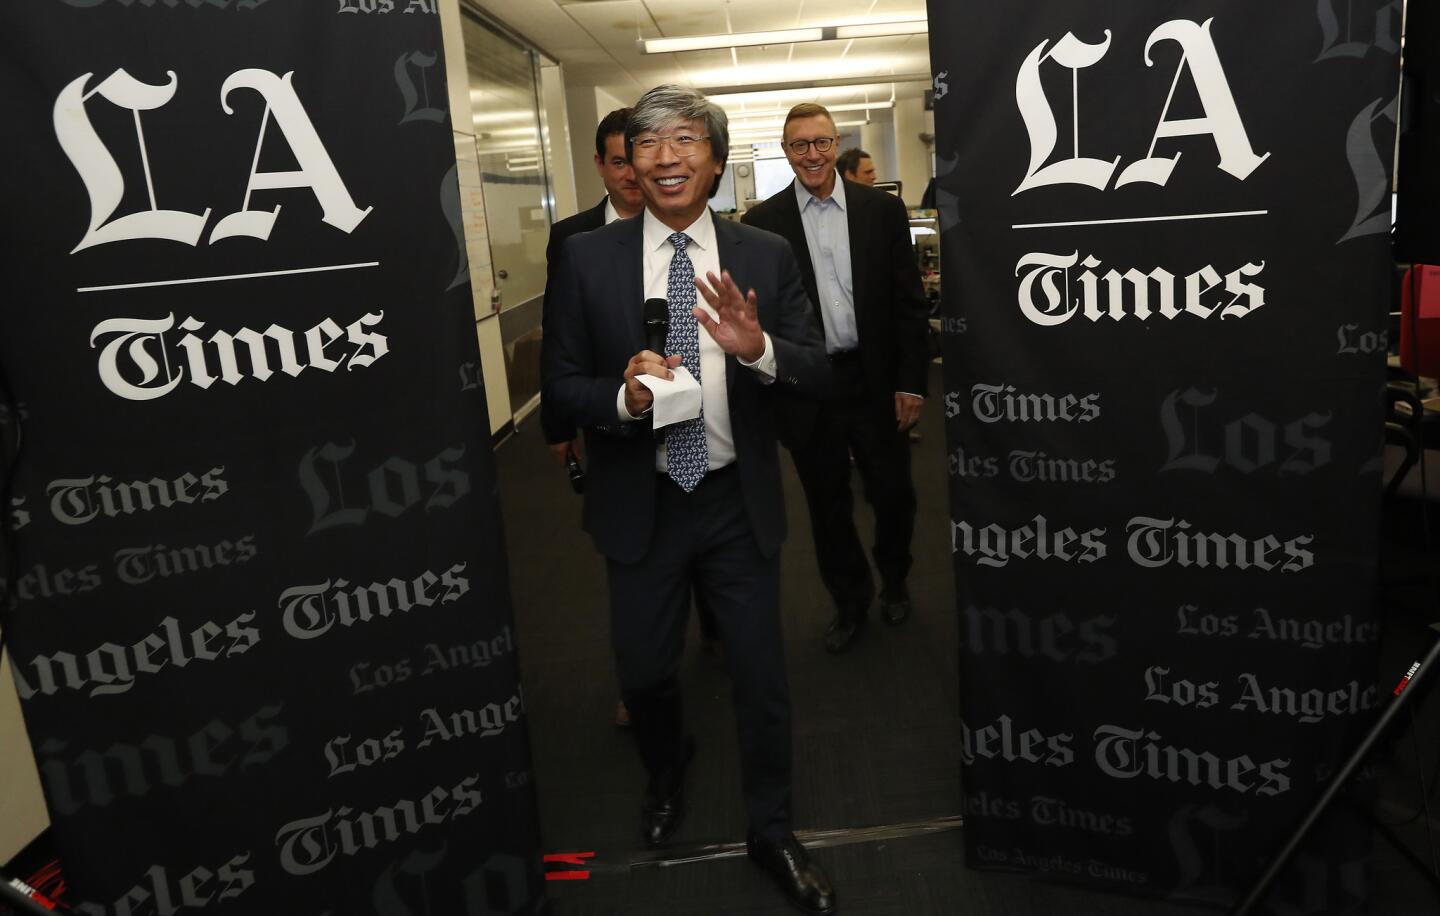 Dr. Patrick Soon-Shiong, foreground, in the Los Angeles Times newsroom Monday. He has taken the title of executive chairman of The Times and California Times, the new corporate moniker for the group of publications that he acquired. Behind him are Chris Argentieri, left, currently the general manager of The Times who will become chief operating officer of California Times, and Norman Pearlstine, who has been named executive editor of The Times.